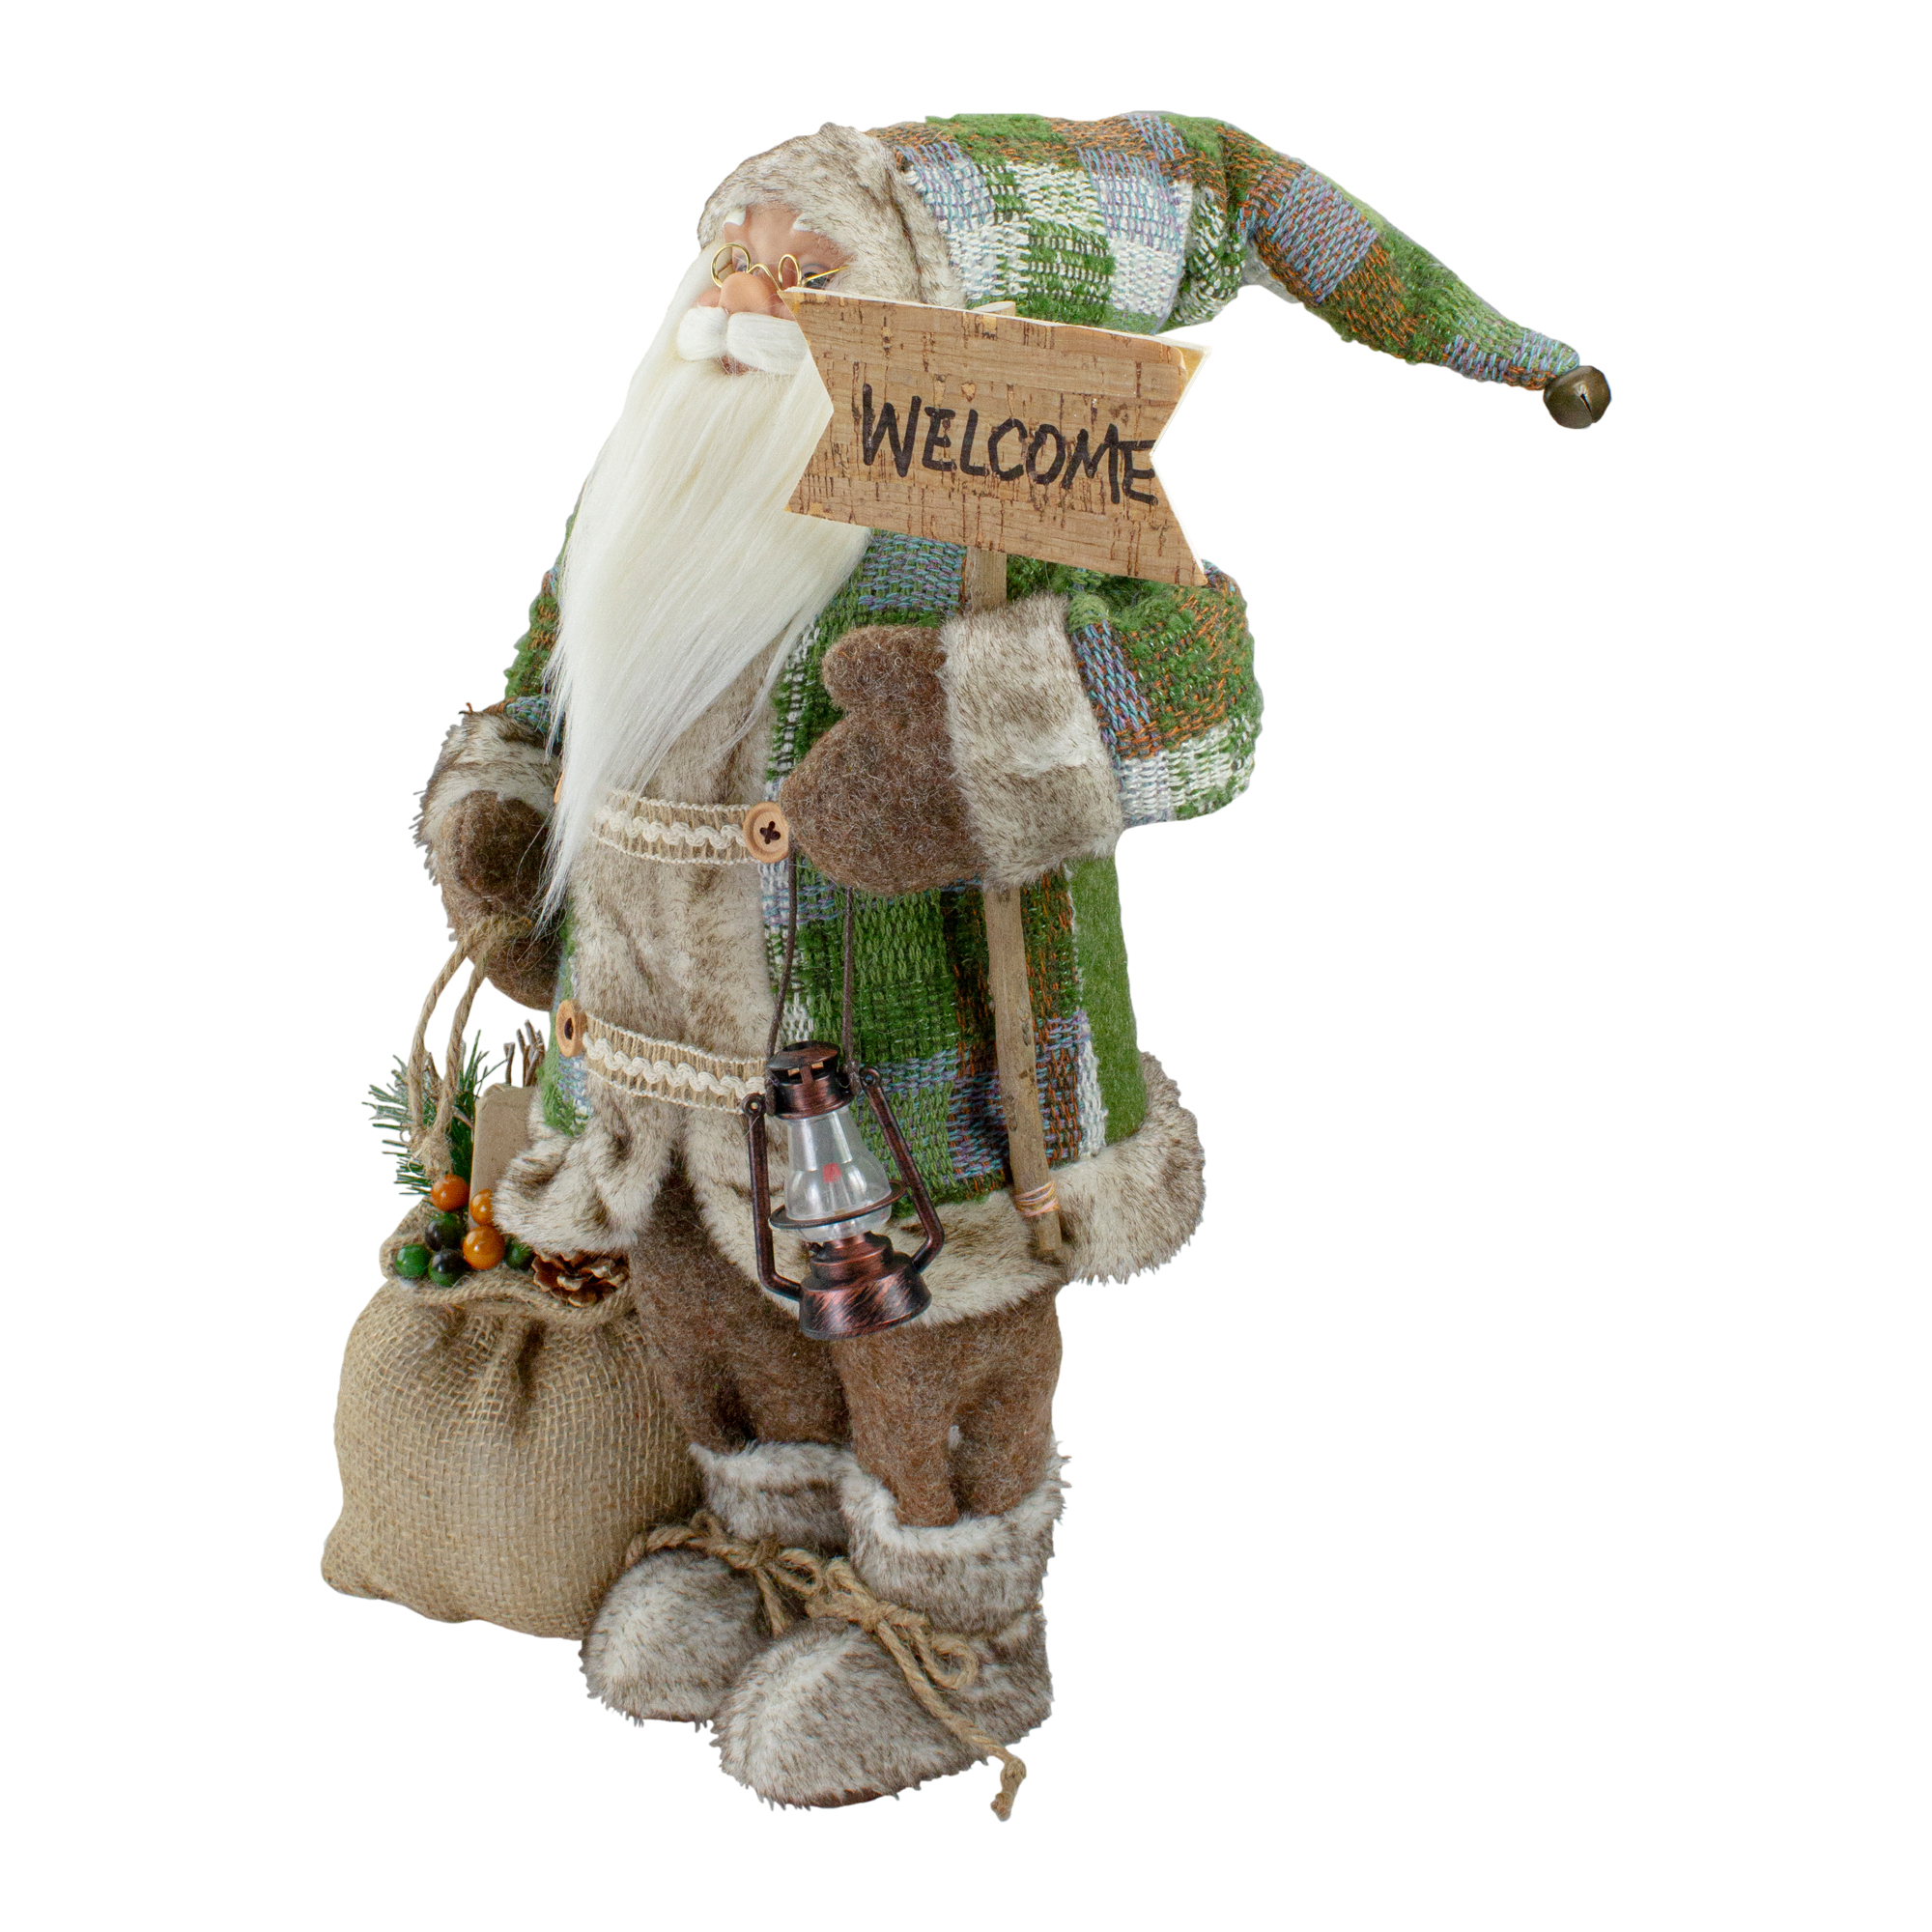 Northlight 18" Standing Santa Christmas Figure Carrying a Welcome Sign